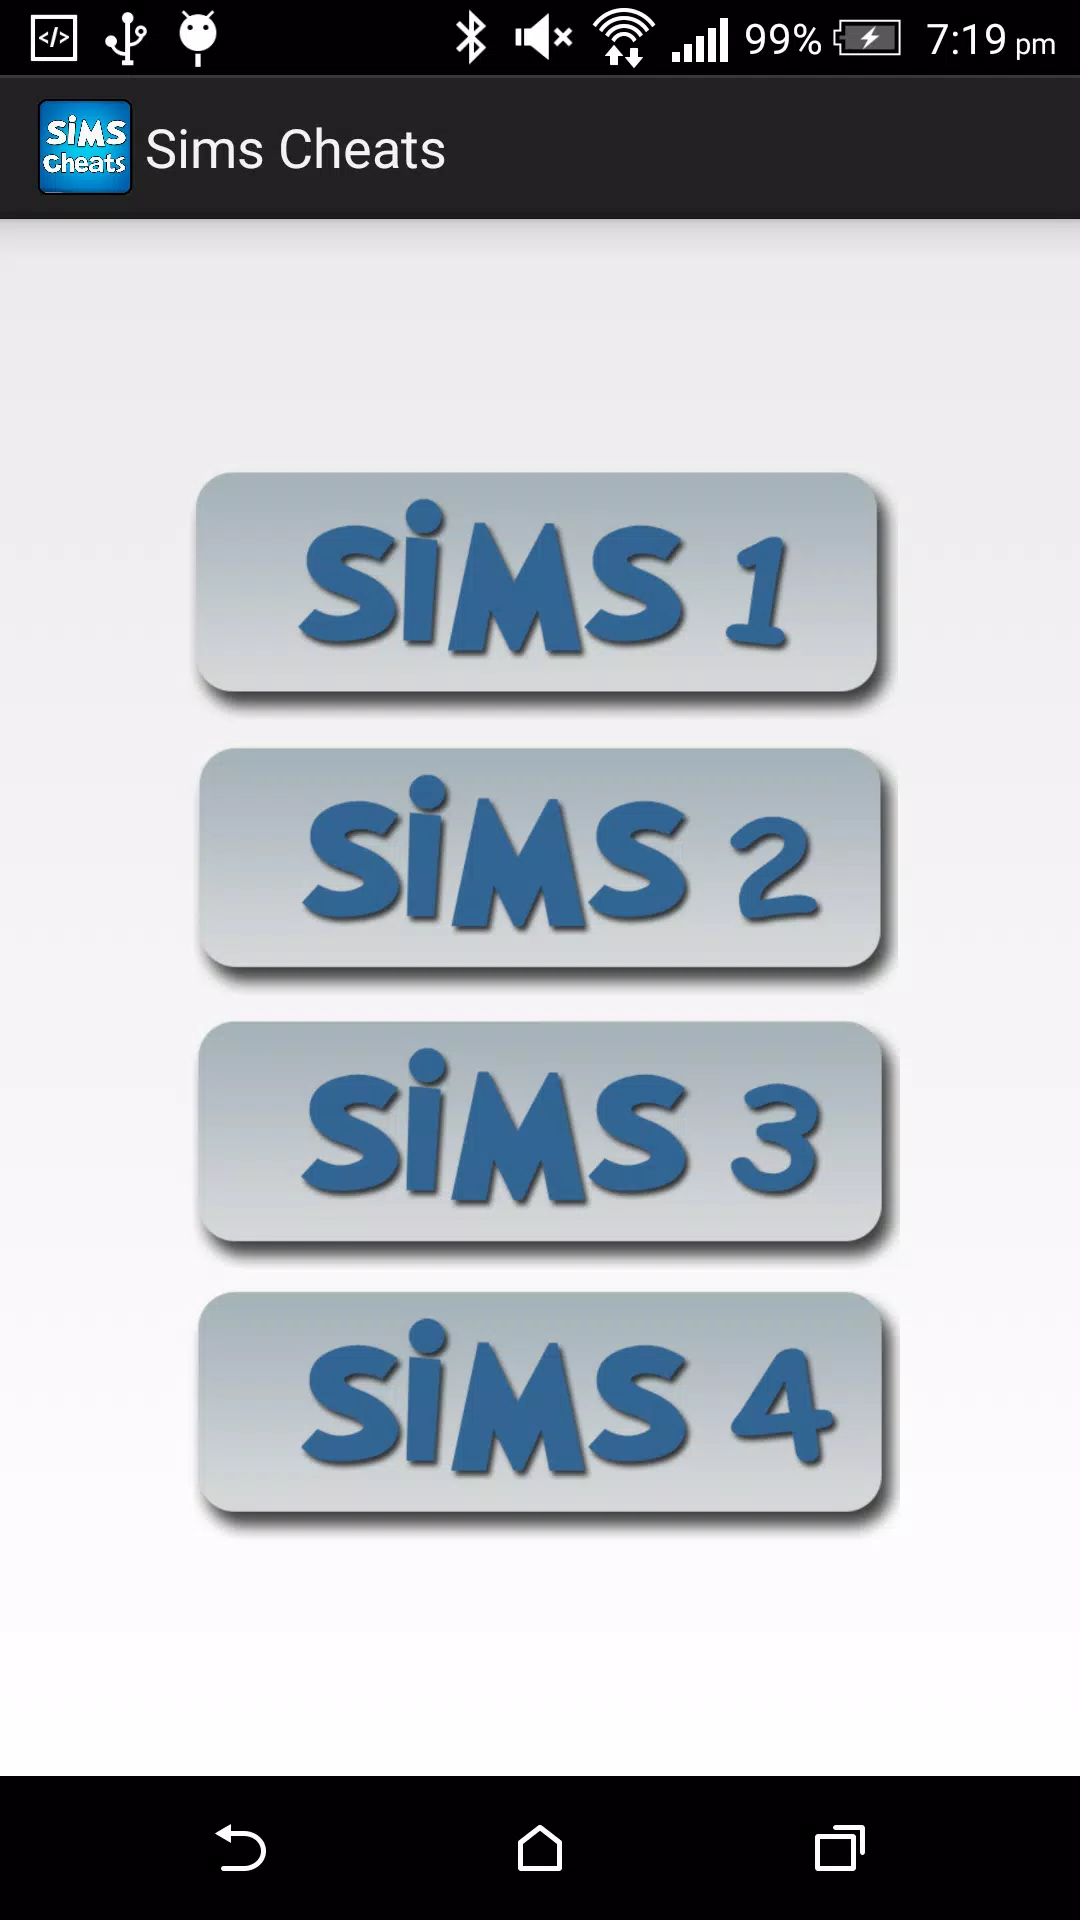 Cheats for Sims 4 + Guides & Videos (unofficial)